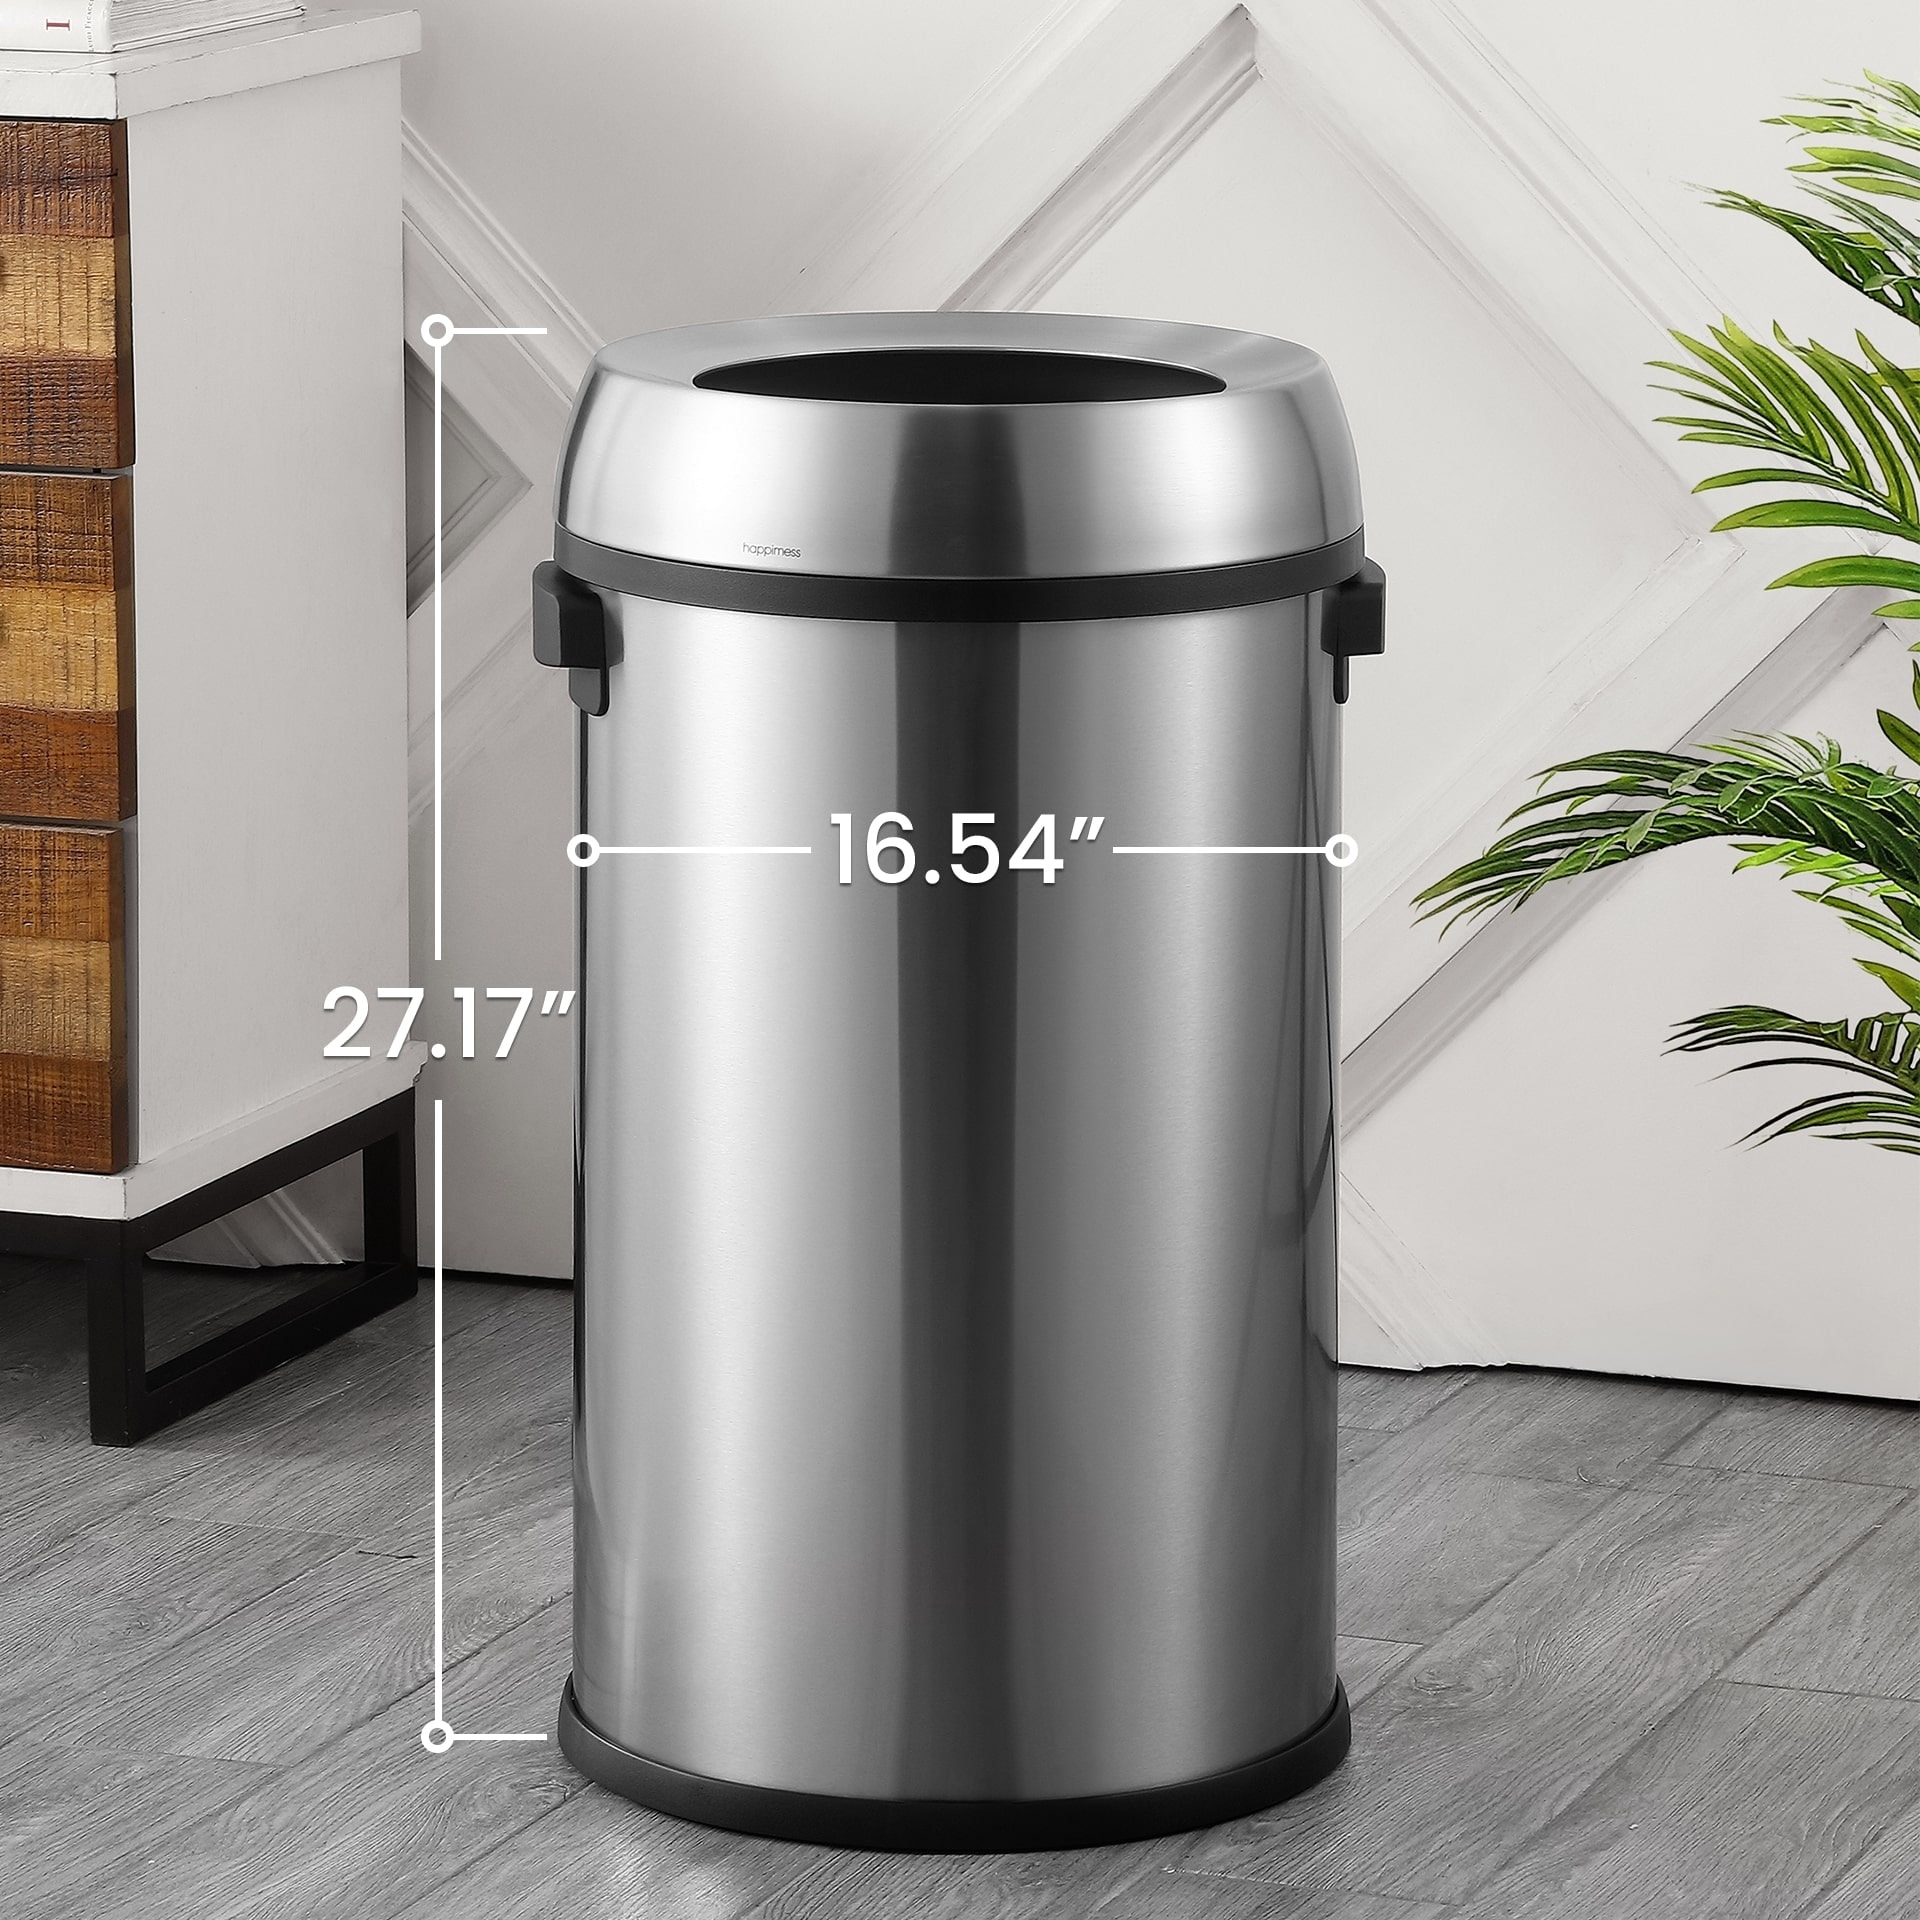 iTouchless Swing Top Kitchen Trash Can 17 Gallon Silver Stainless Steel